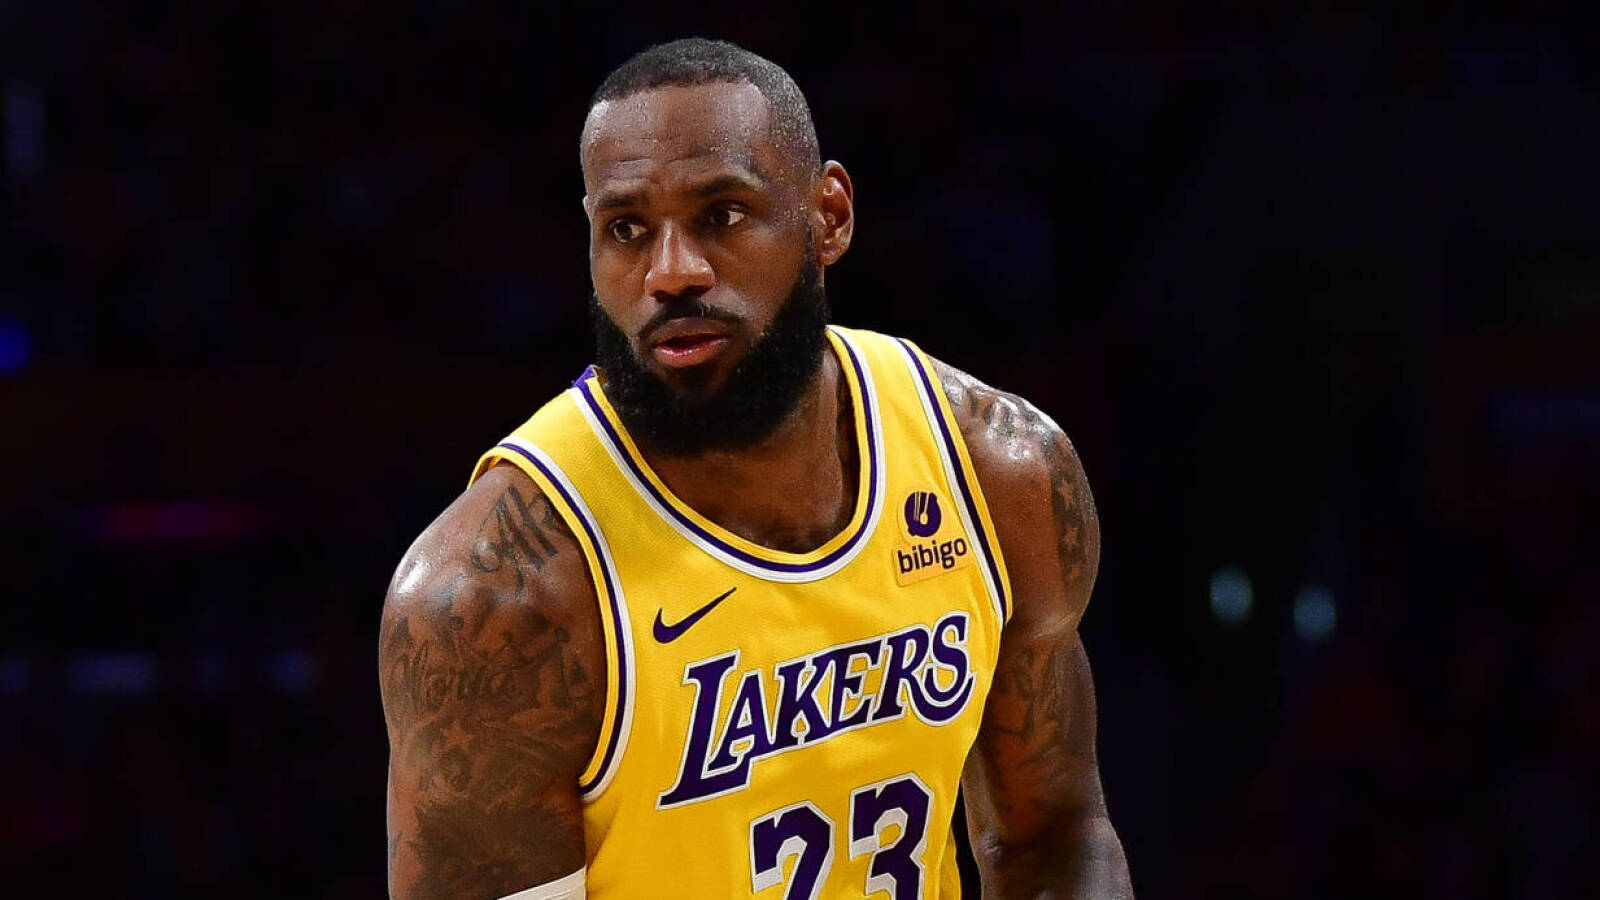 Insider offers prediction about LeBron and Bronny James